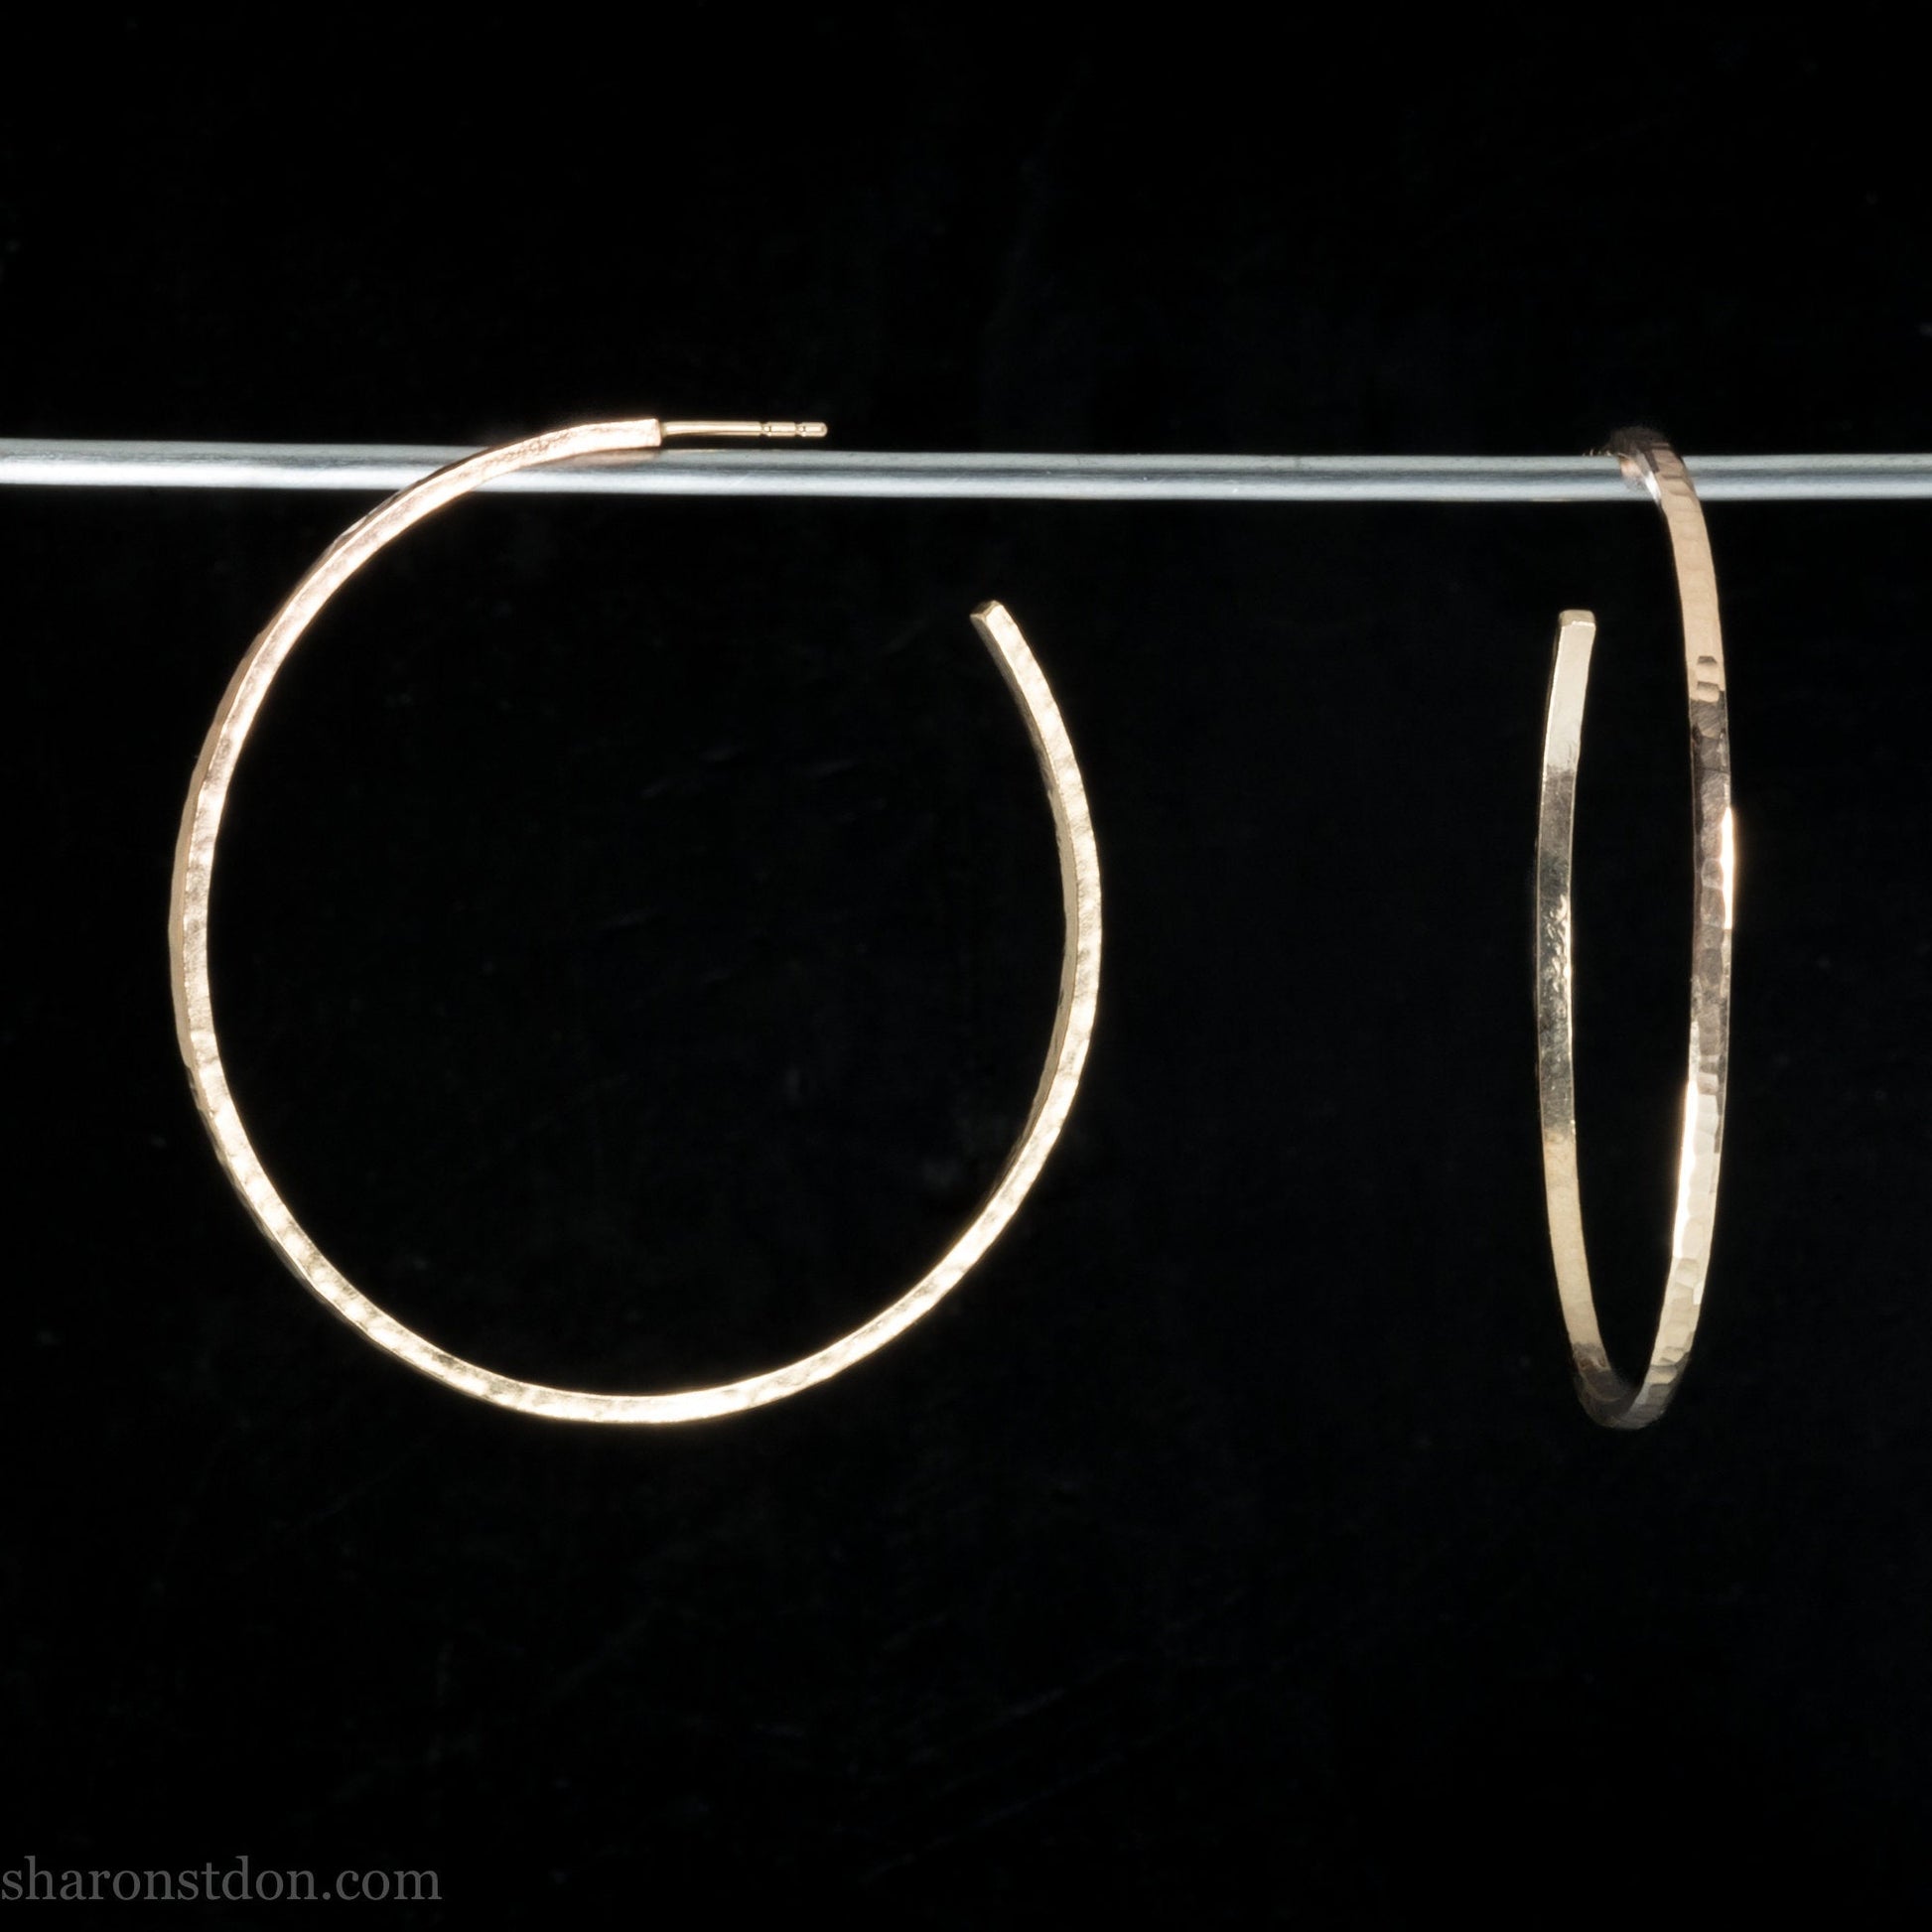 Gold hoop earrings handmade from solid yellow gold in the USA for women. Size large, 50mm diameter, hammered texture.